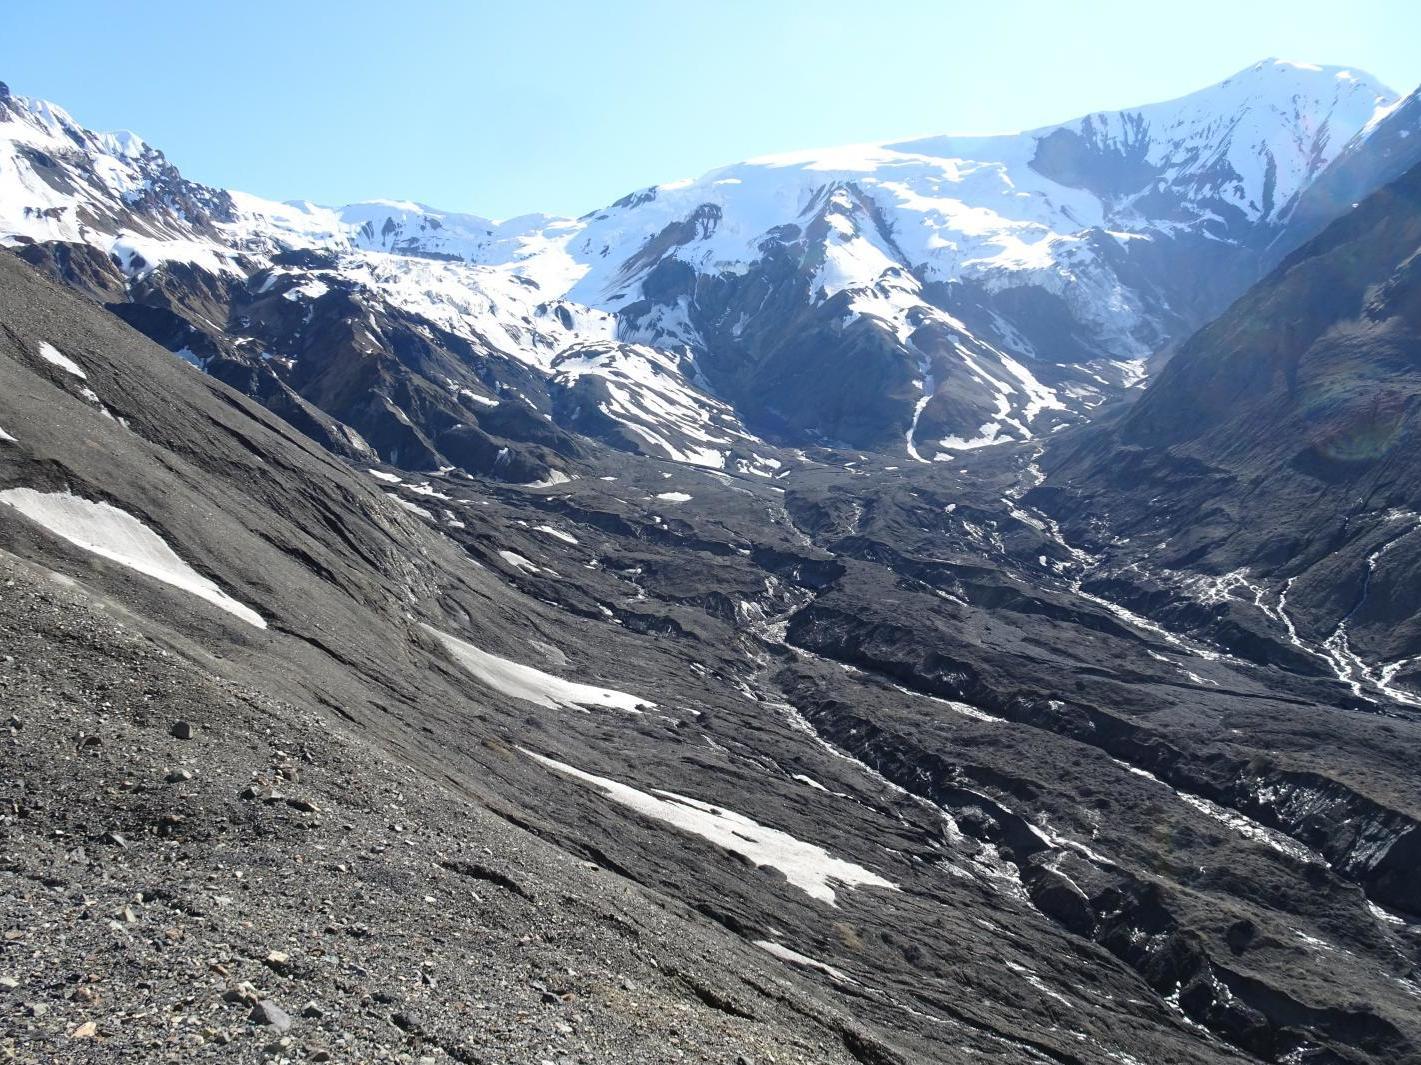 Sliding glaciers 'a new threat' as global warming melts ice